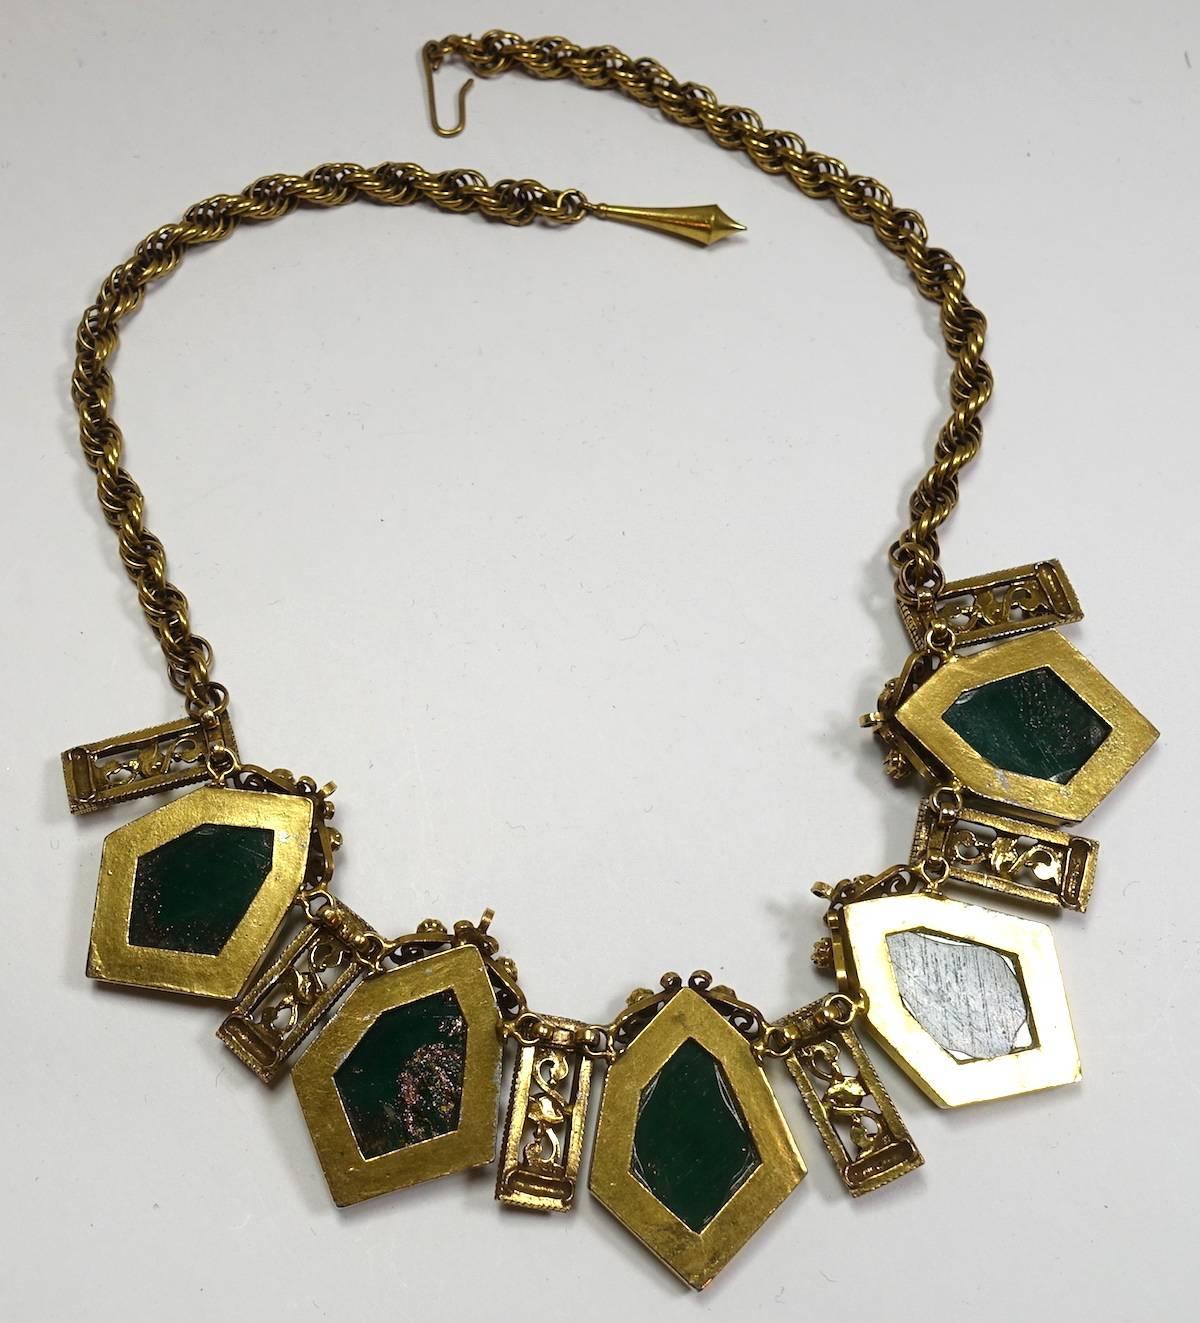 This vintage 1940s necklace features faux coral and green foiled stones in a gold-plated base metal setting.  This necklace measures 20” x 1-3/4” with a hook closure and is in excellent condition.